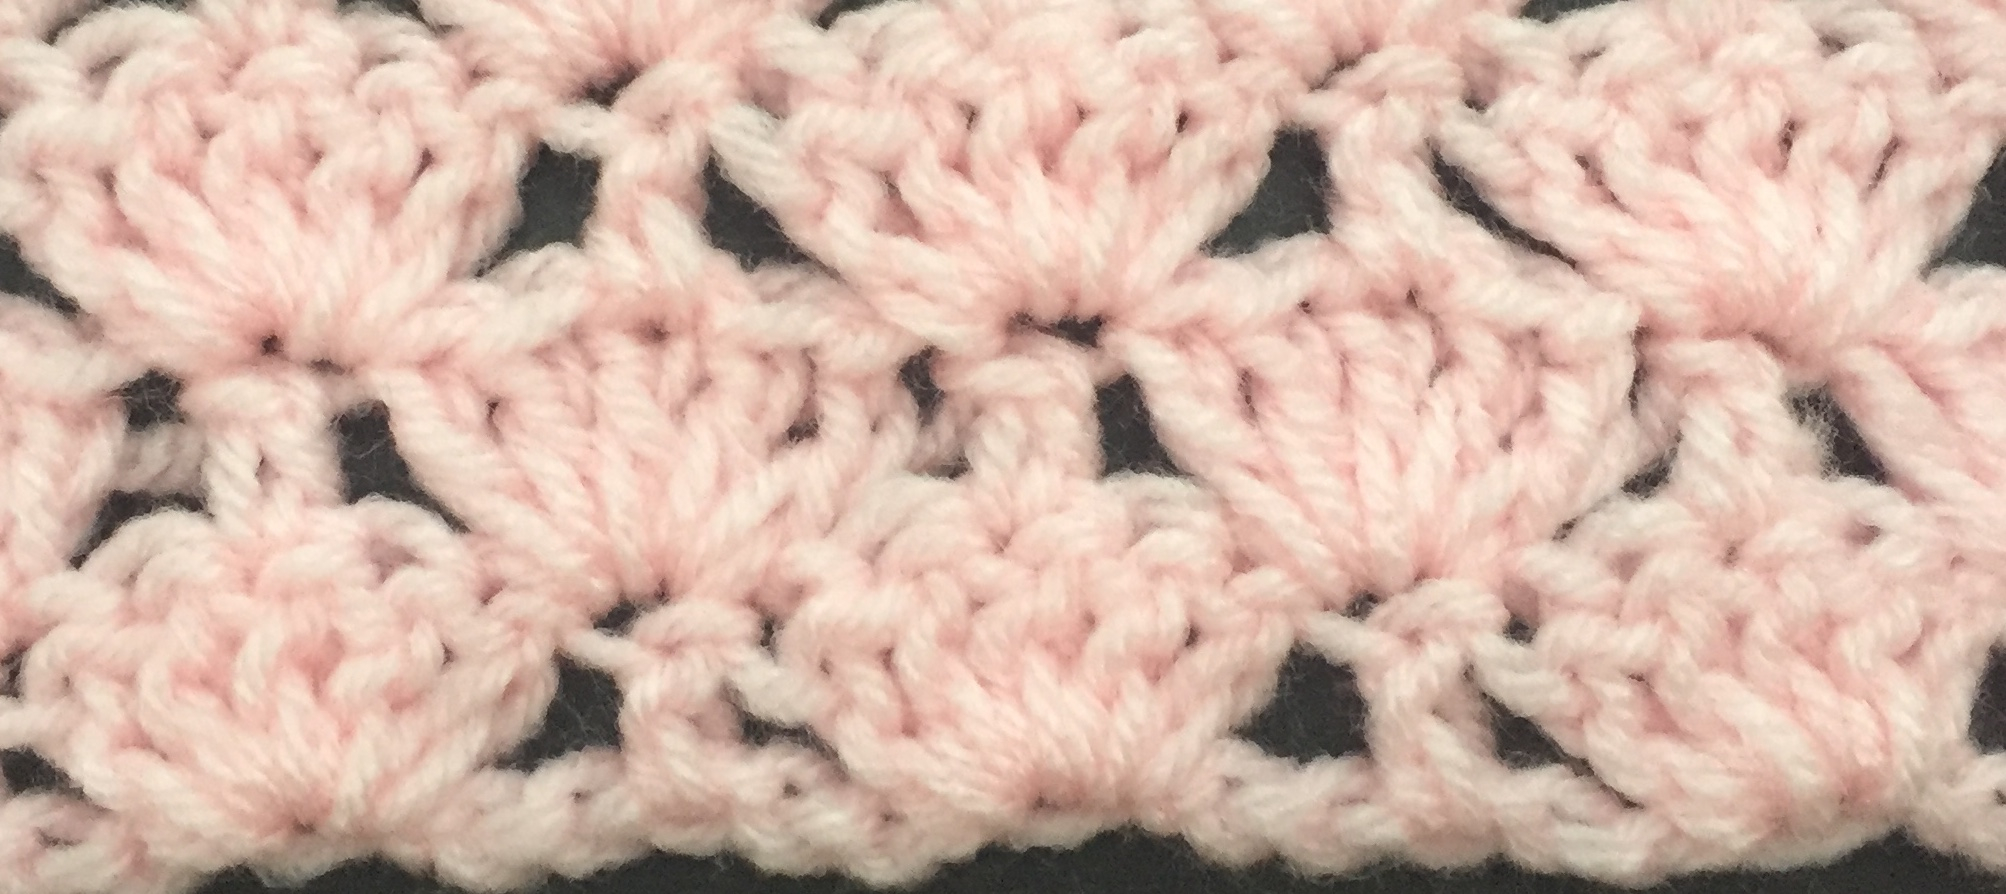 Crochet Shell Pattern Scarf Guide To Crochet Shell Stitch Variations With Patterns Red Heart